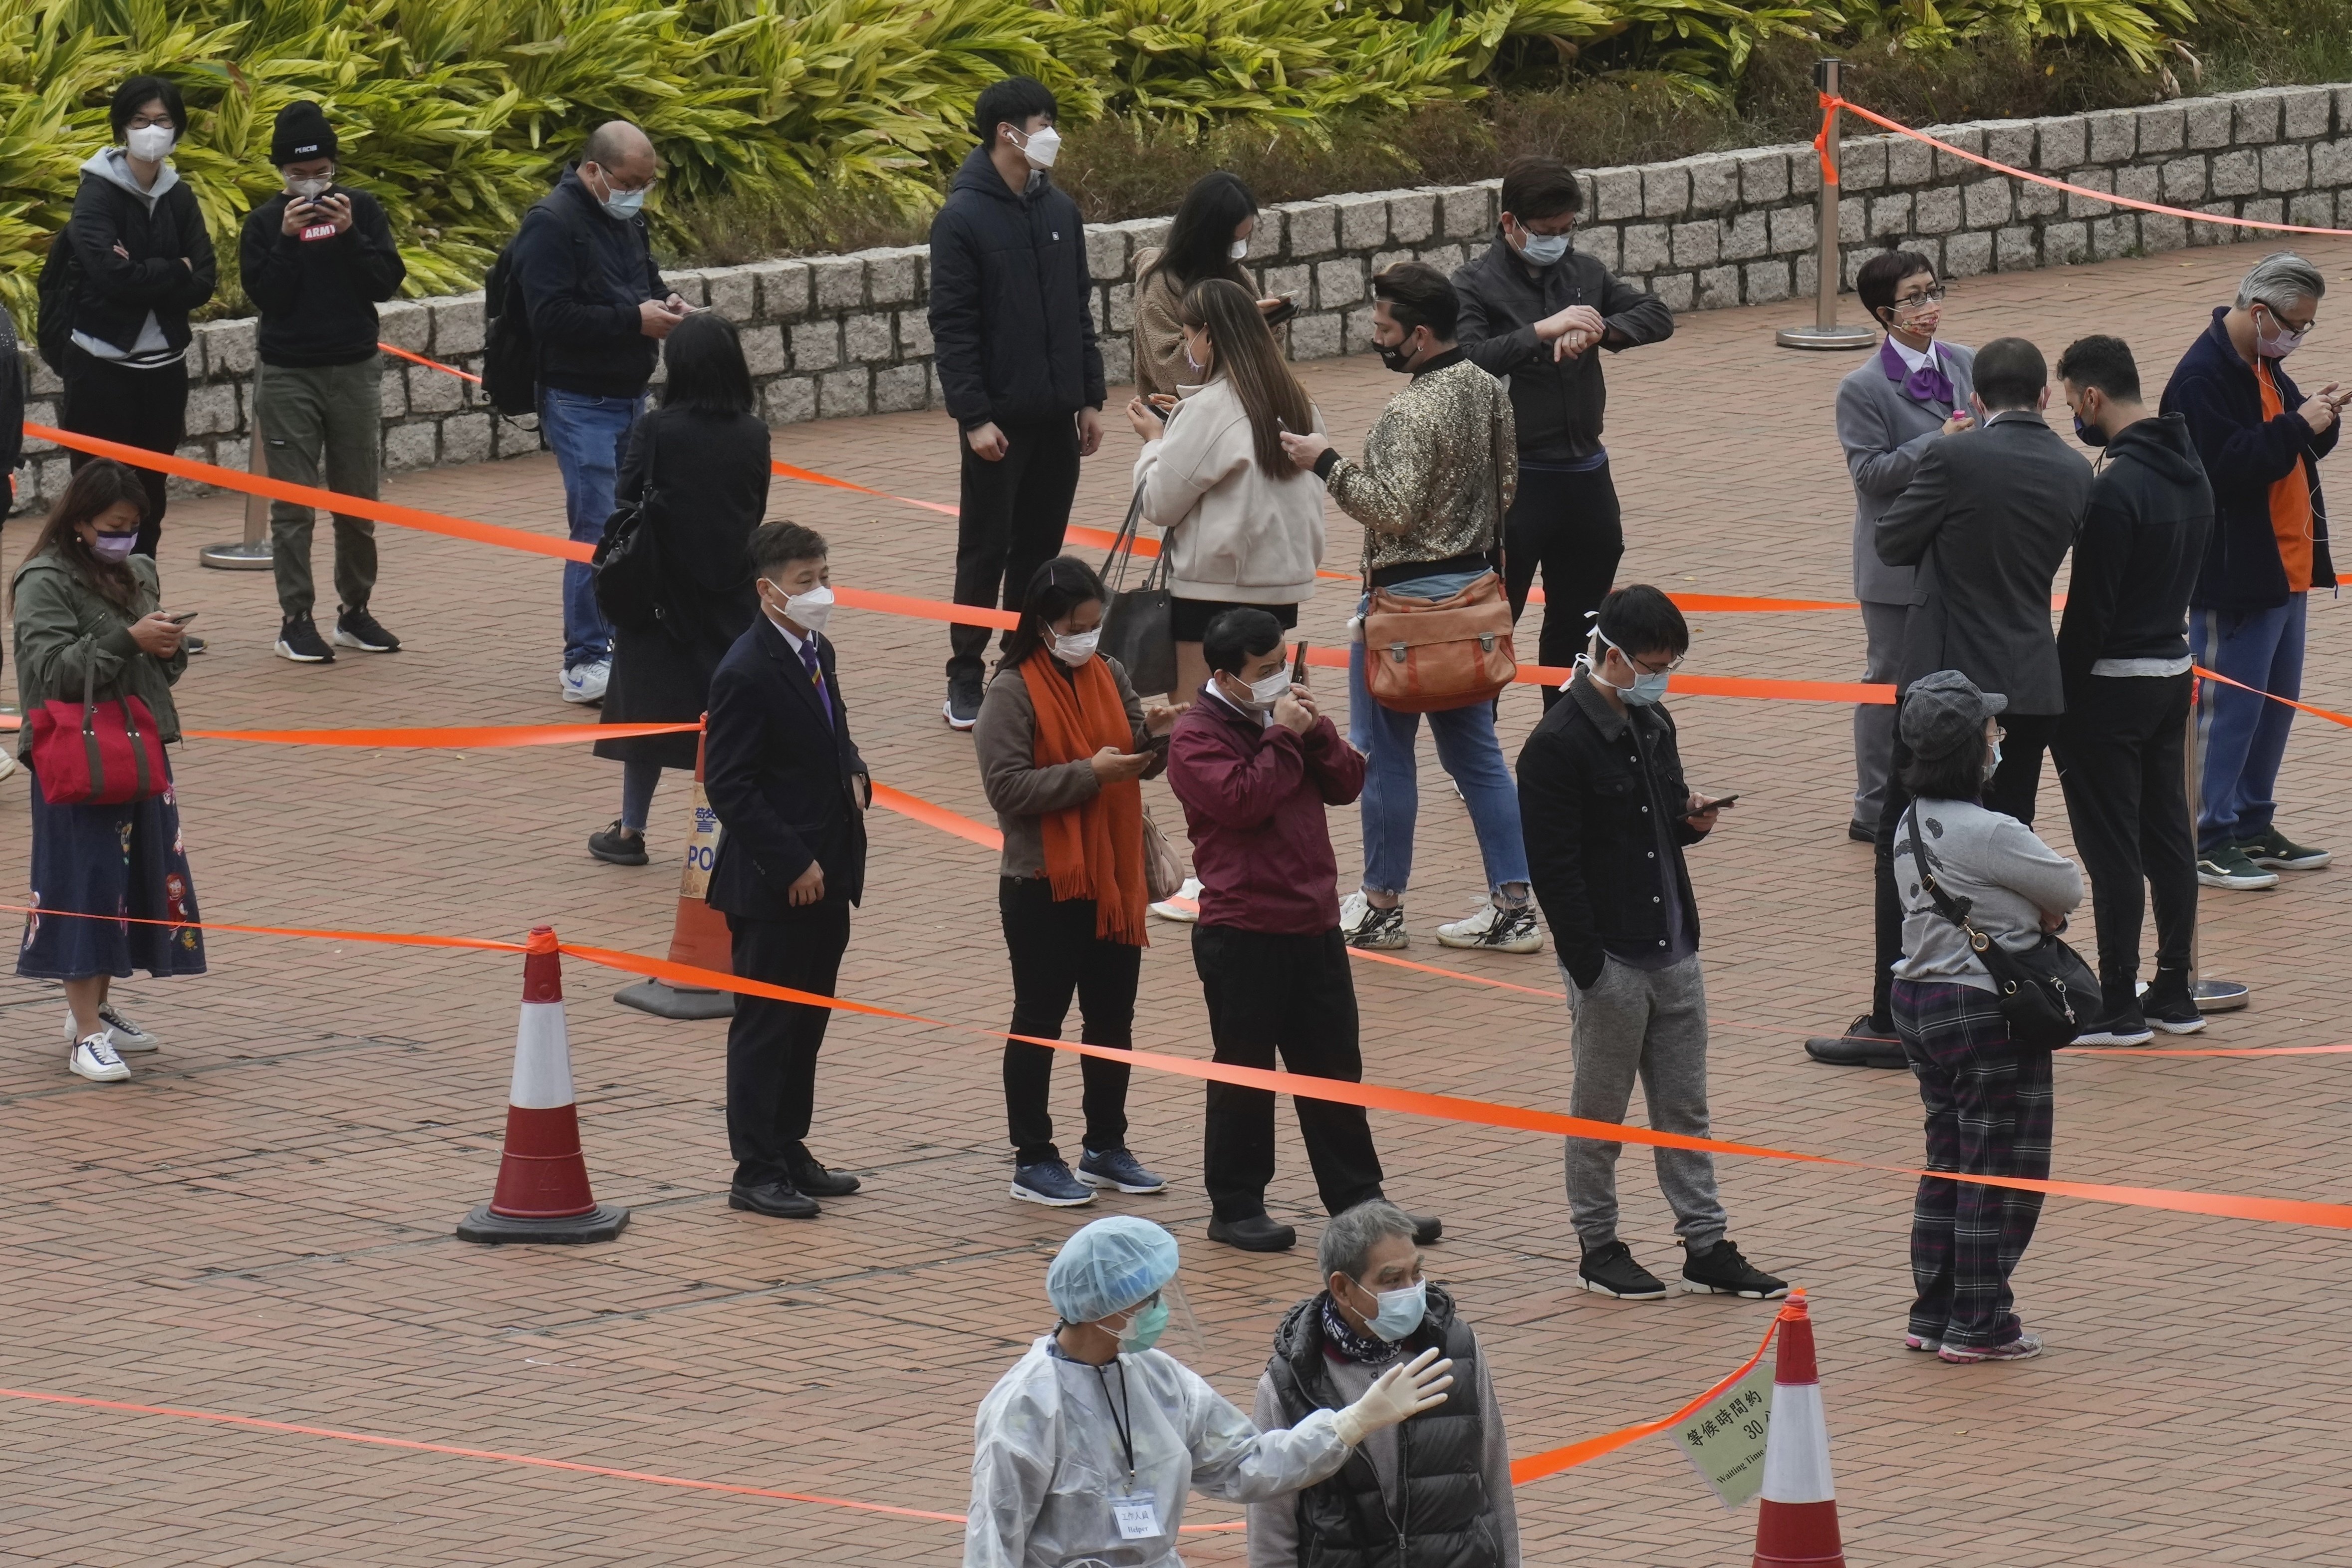 Residents queue up to get tested for the coronavirus at a temporary testing center for COVID-19 in Hong Kong, Feb. 13, 2022. (AP Photo)